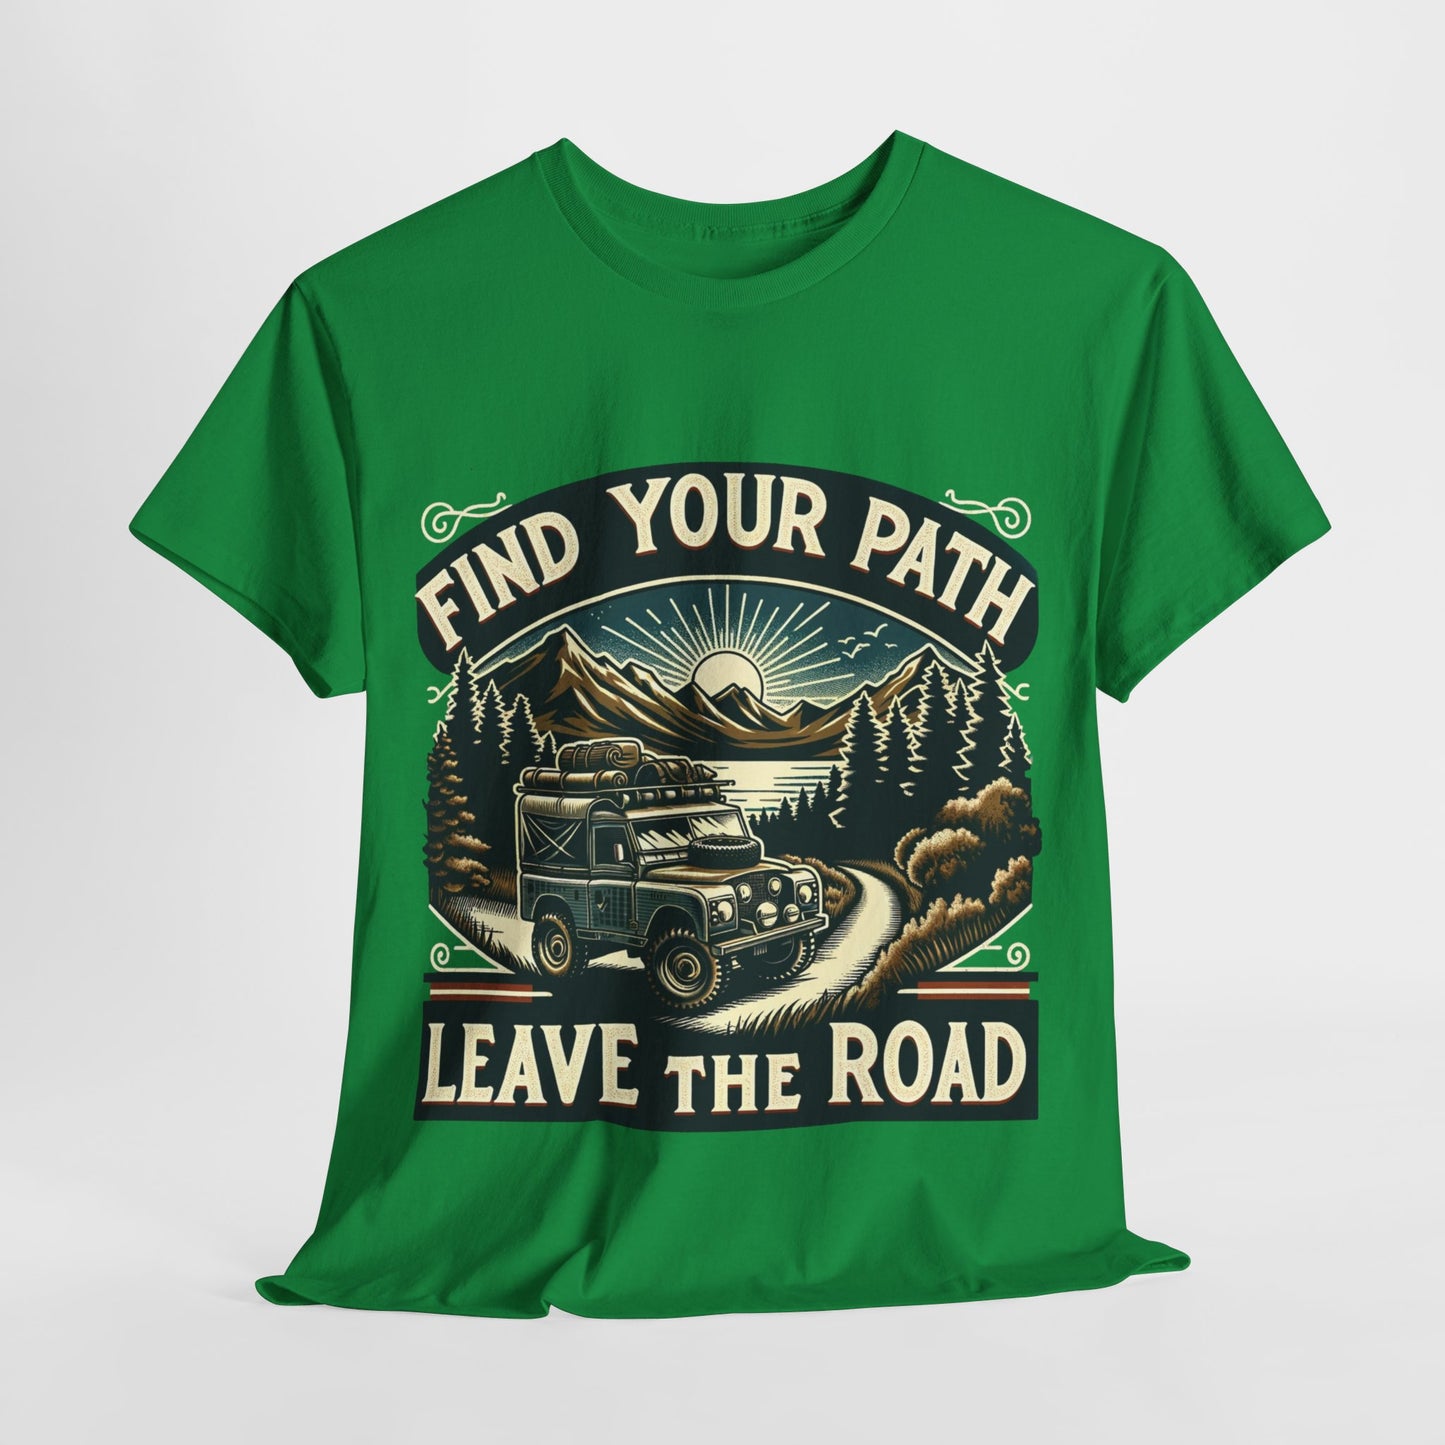 "Find Your Path, Leave the Road" T-Shirts – Perfect for Adventure Enthusiasts